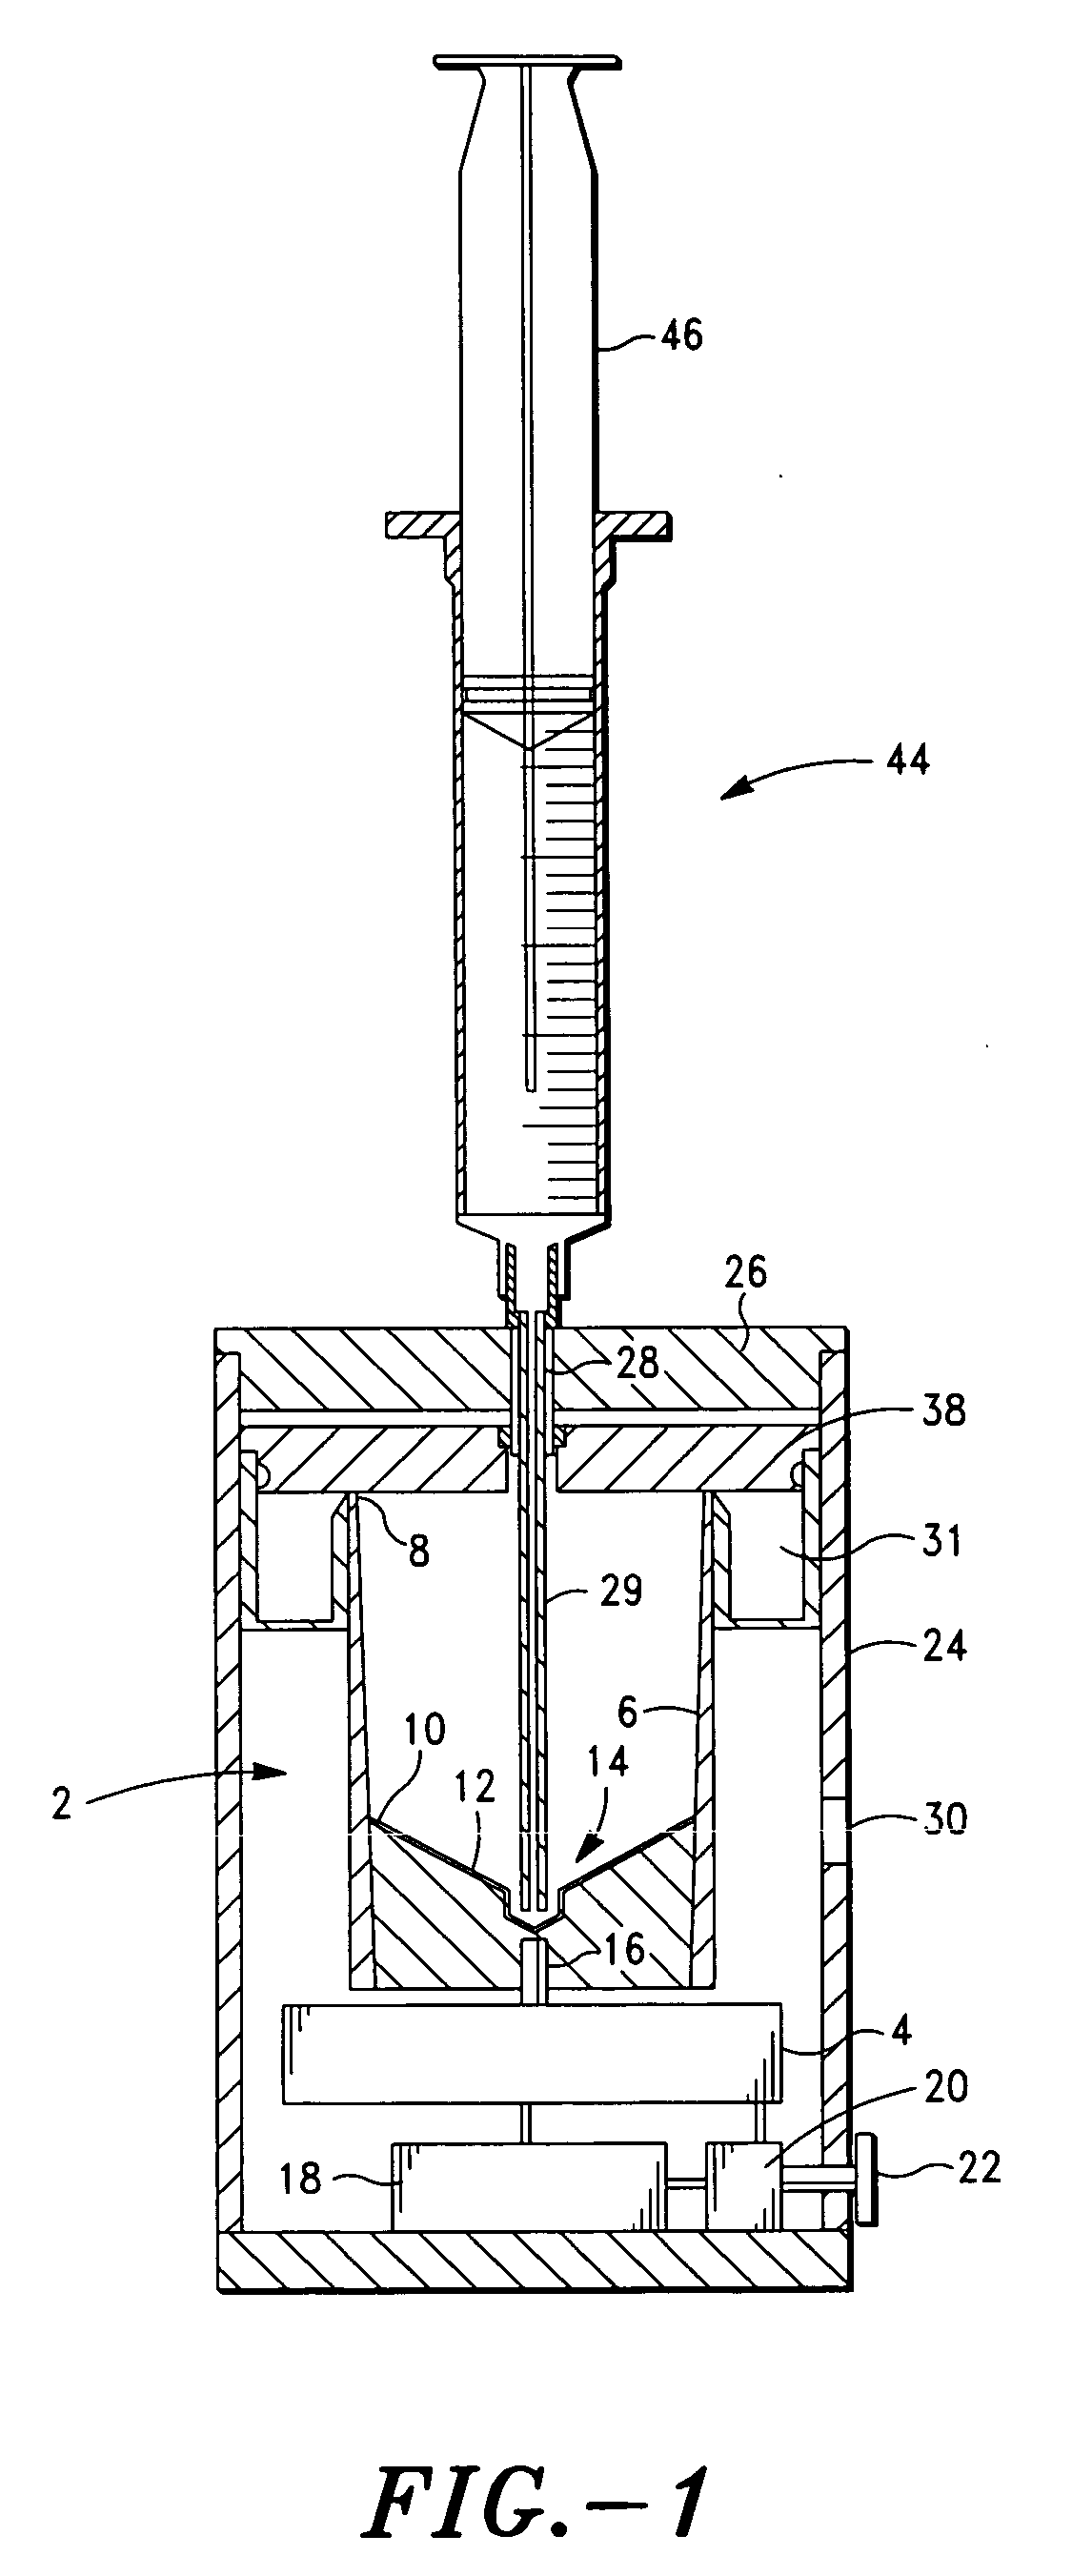 Method and apparatus for preparing platelet rich plasma and concentrates thereof